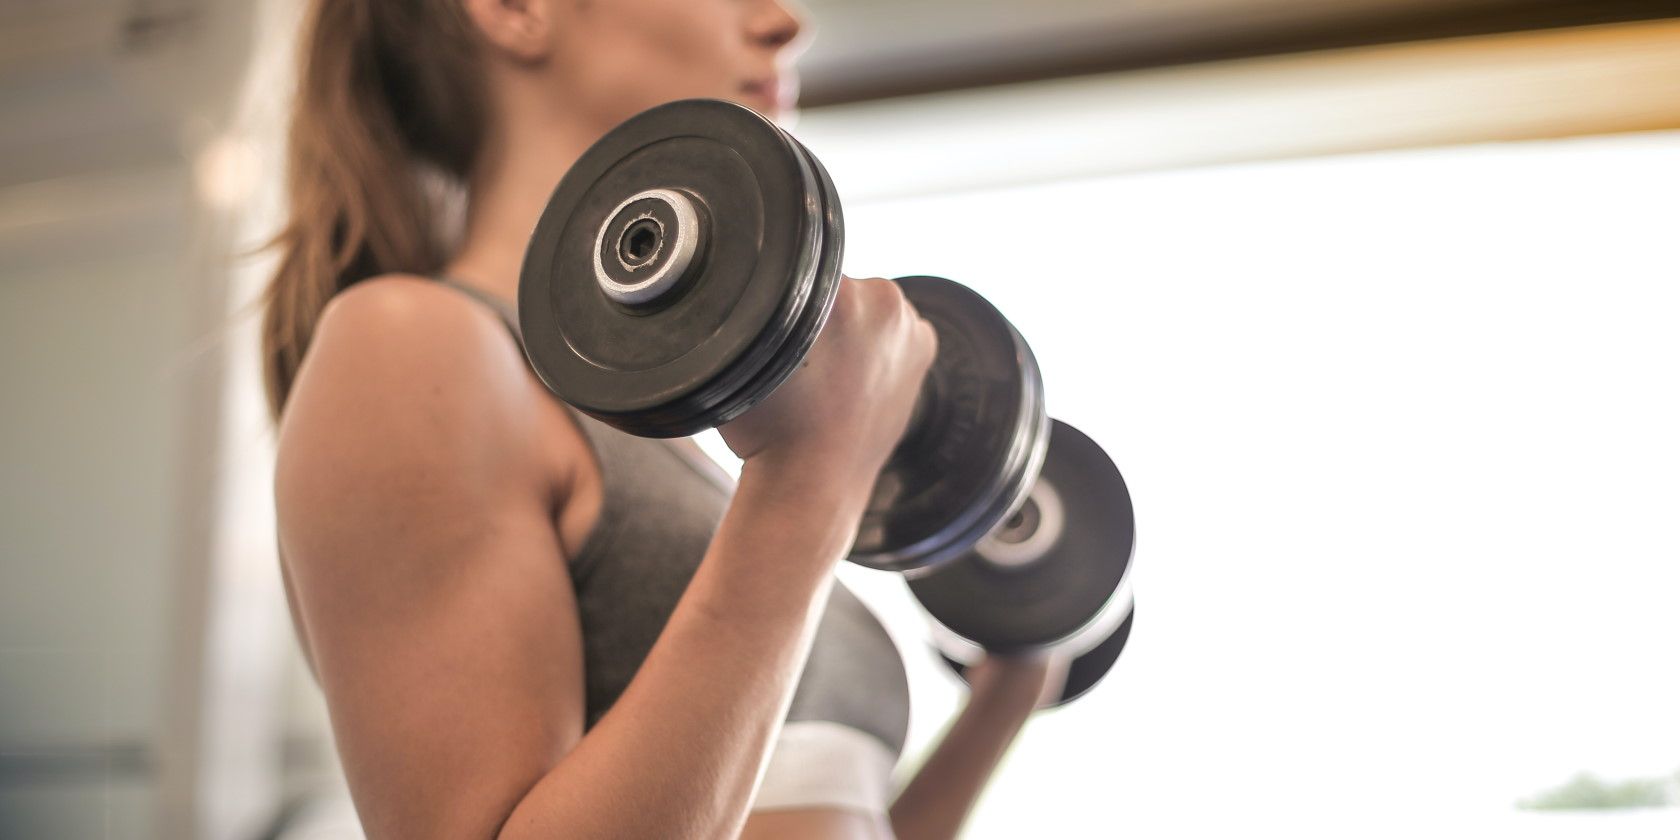 woman at the gym wearing grey sports top lifting black dumbbells